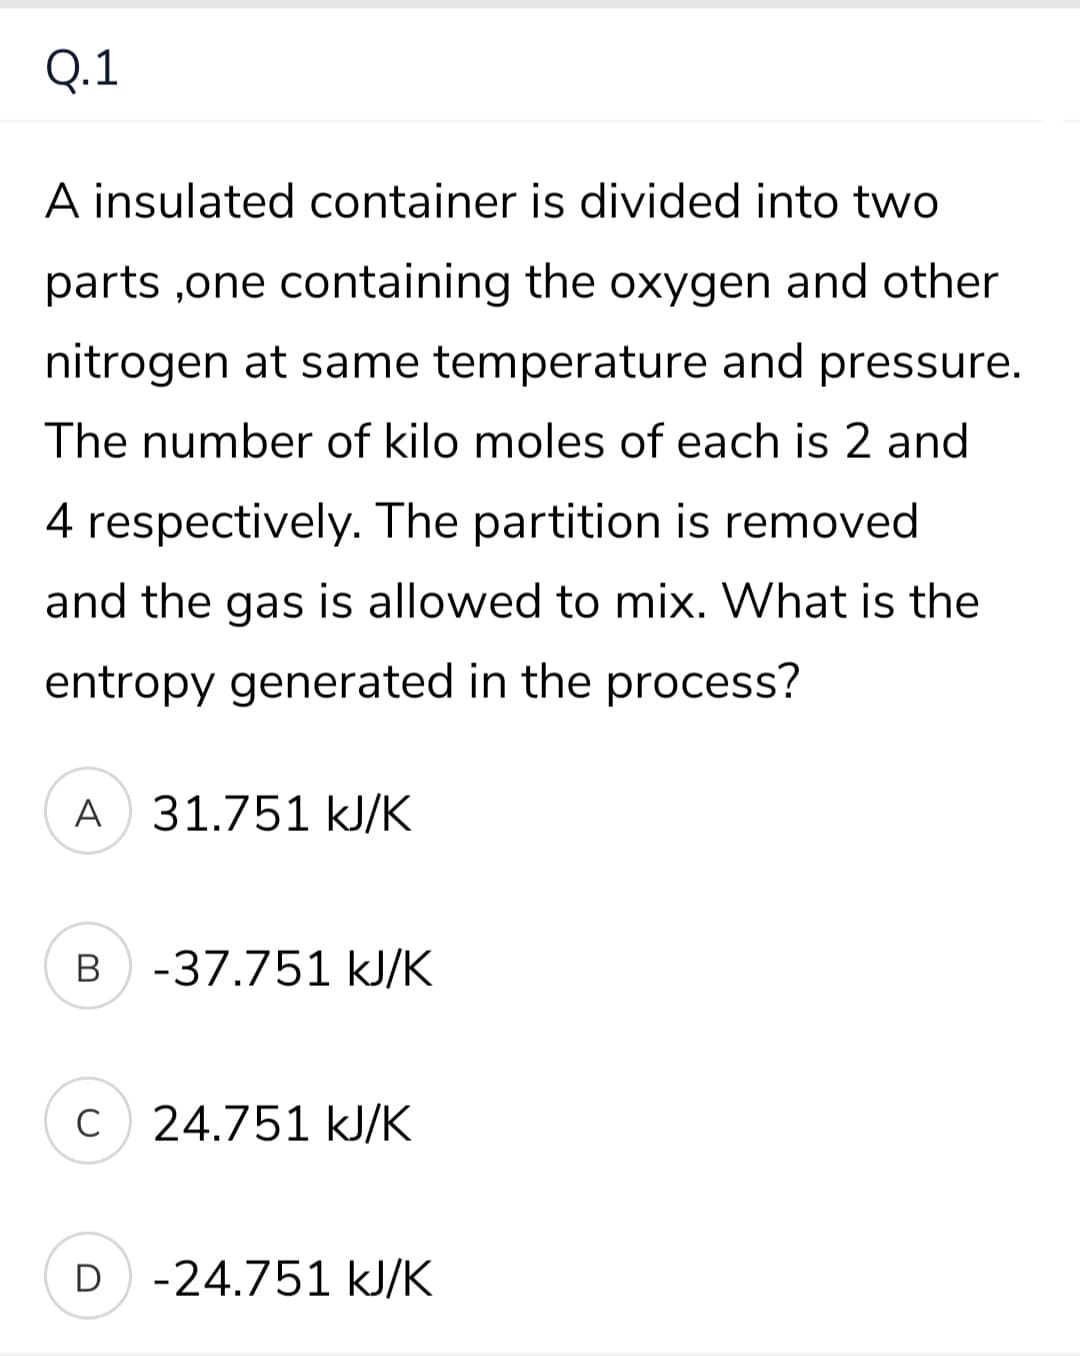 Q.1
A insulated container is divided into two
parts ,one containing the oxygen and other
nitrogen at same temperature and pressure.
The number of kilo moles of each is 2 and
4 respectively. The partition is removed
and the gas is allowed to mix. What is the
entropy generated in the process?
A
31.751 kJ/K
В
-37.751 kJ/K
C
C 24.751 kJ/K
D -24.751 kJ/K
